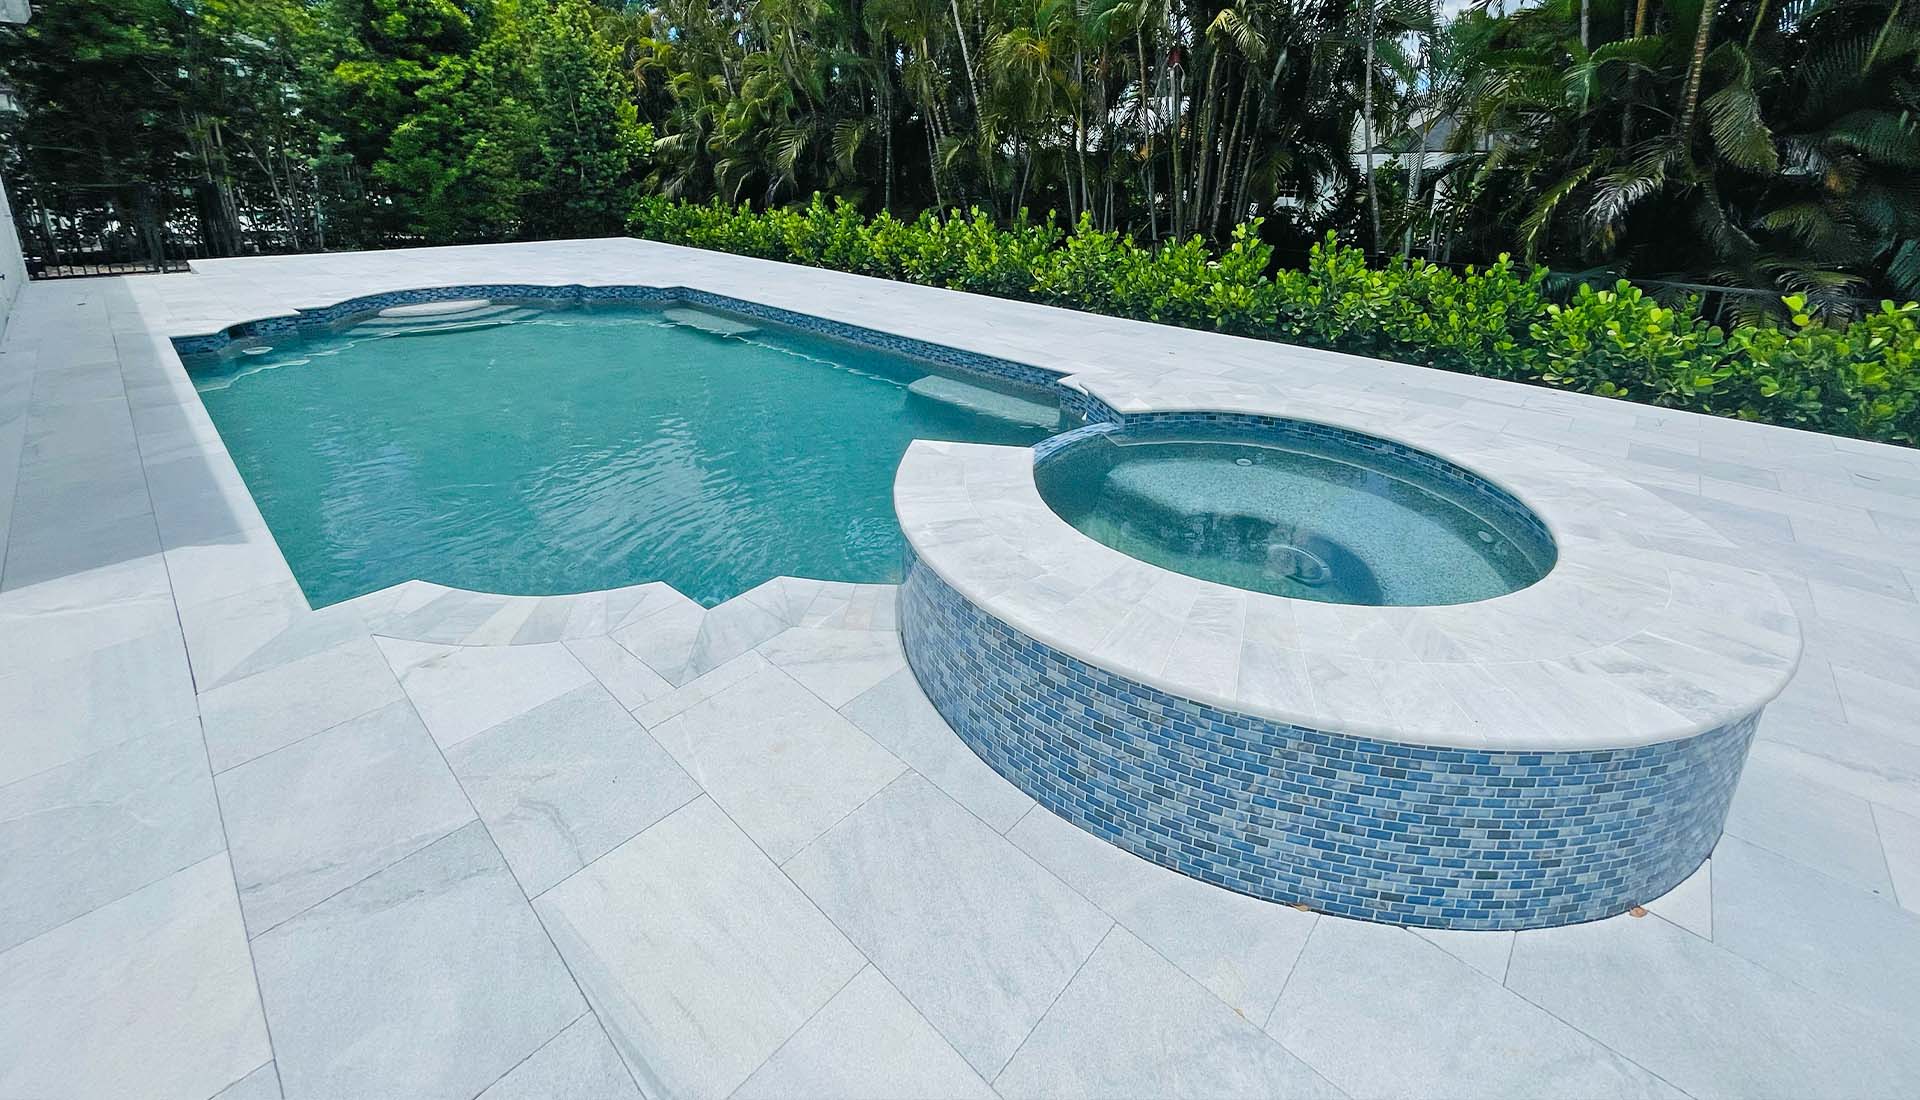 Gorgeous pool, spa, and deck renovation by Pool and Deck Concepts, Naples, FL